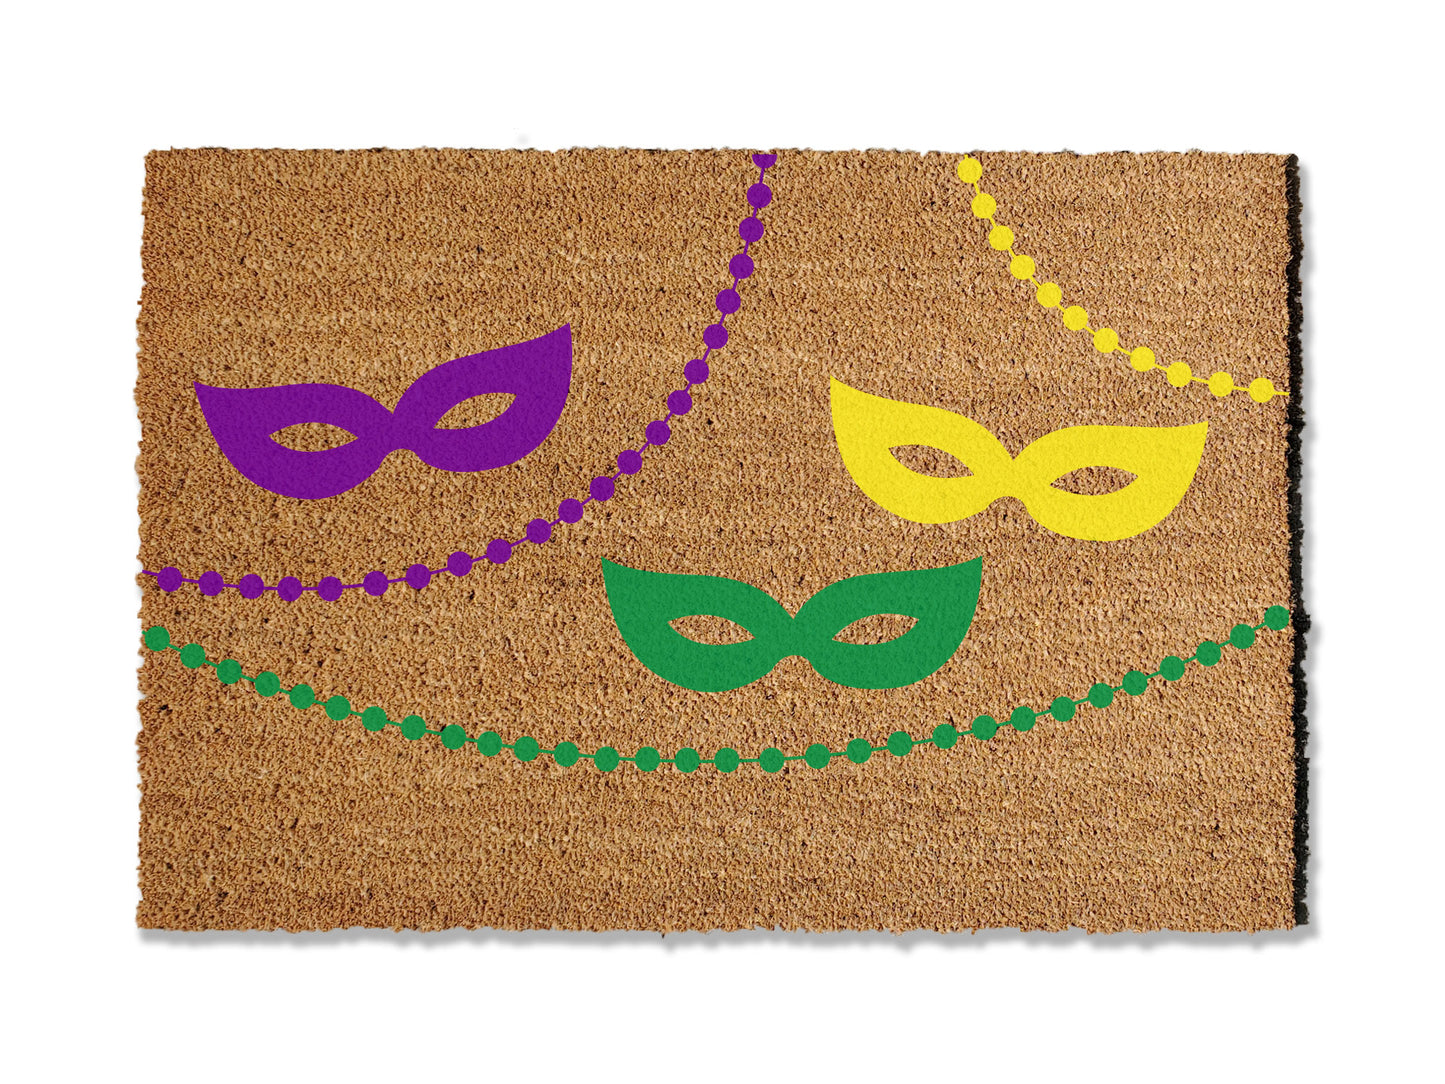 Bring the spirit of Mardi Gras to your doorstep with our festive coir doormat adorned with colorful masks and beads. Perfect for the celebration, this vibrant mat adds a touch of carnival flair to your entryway.